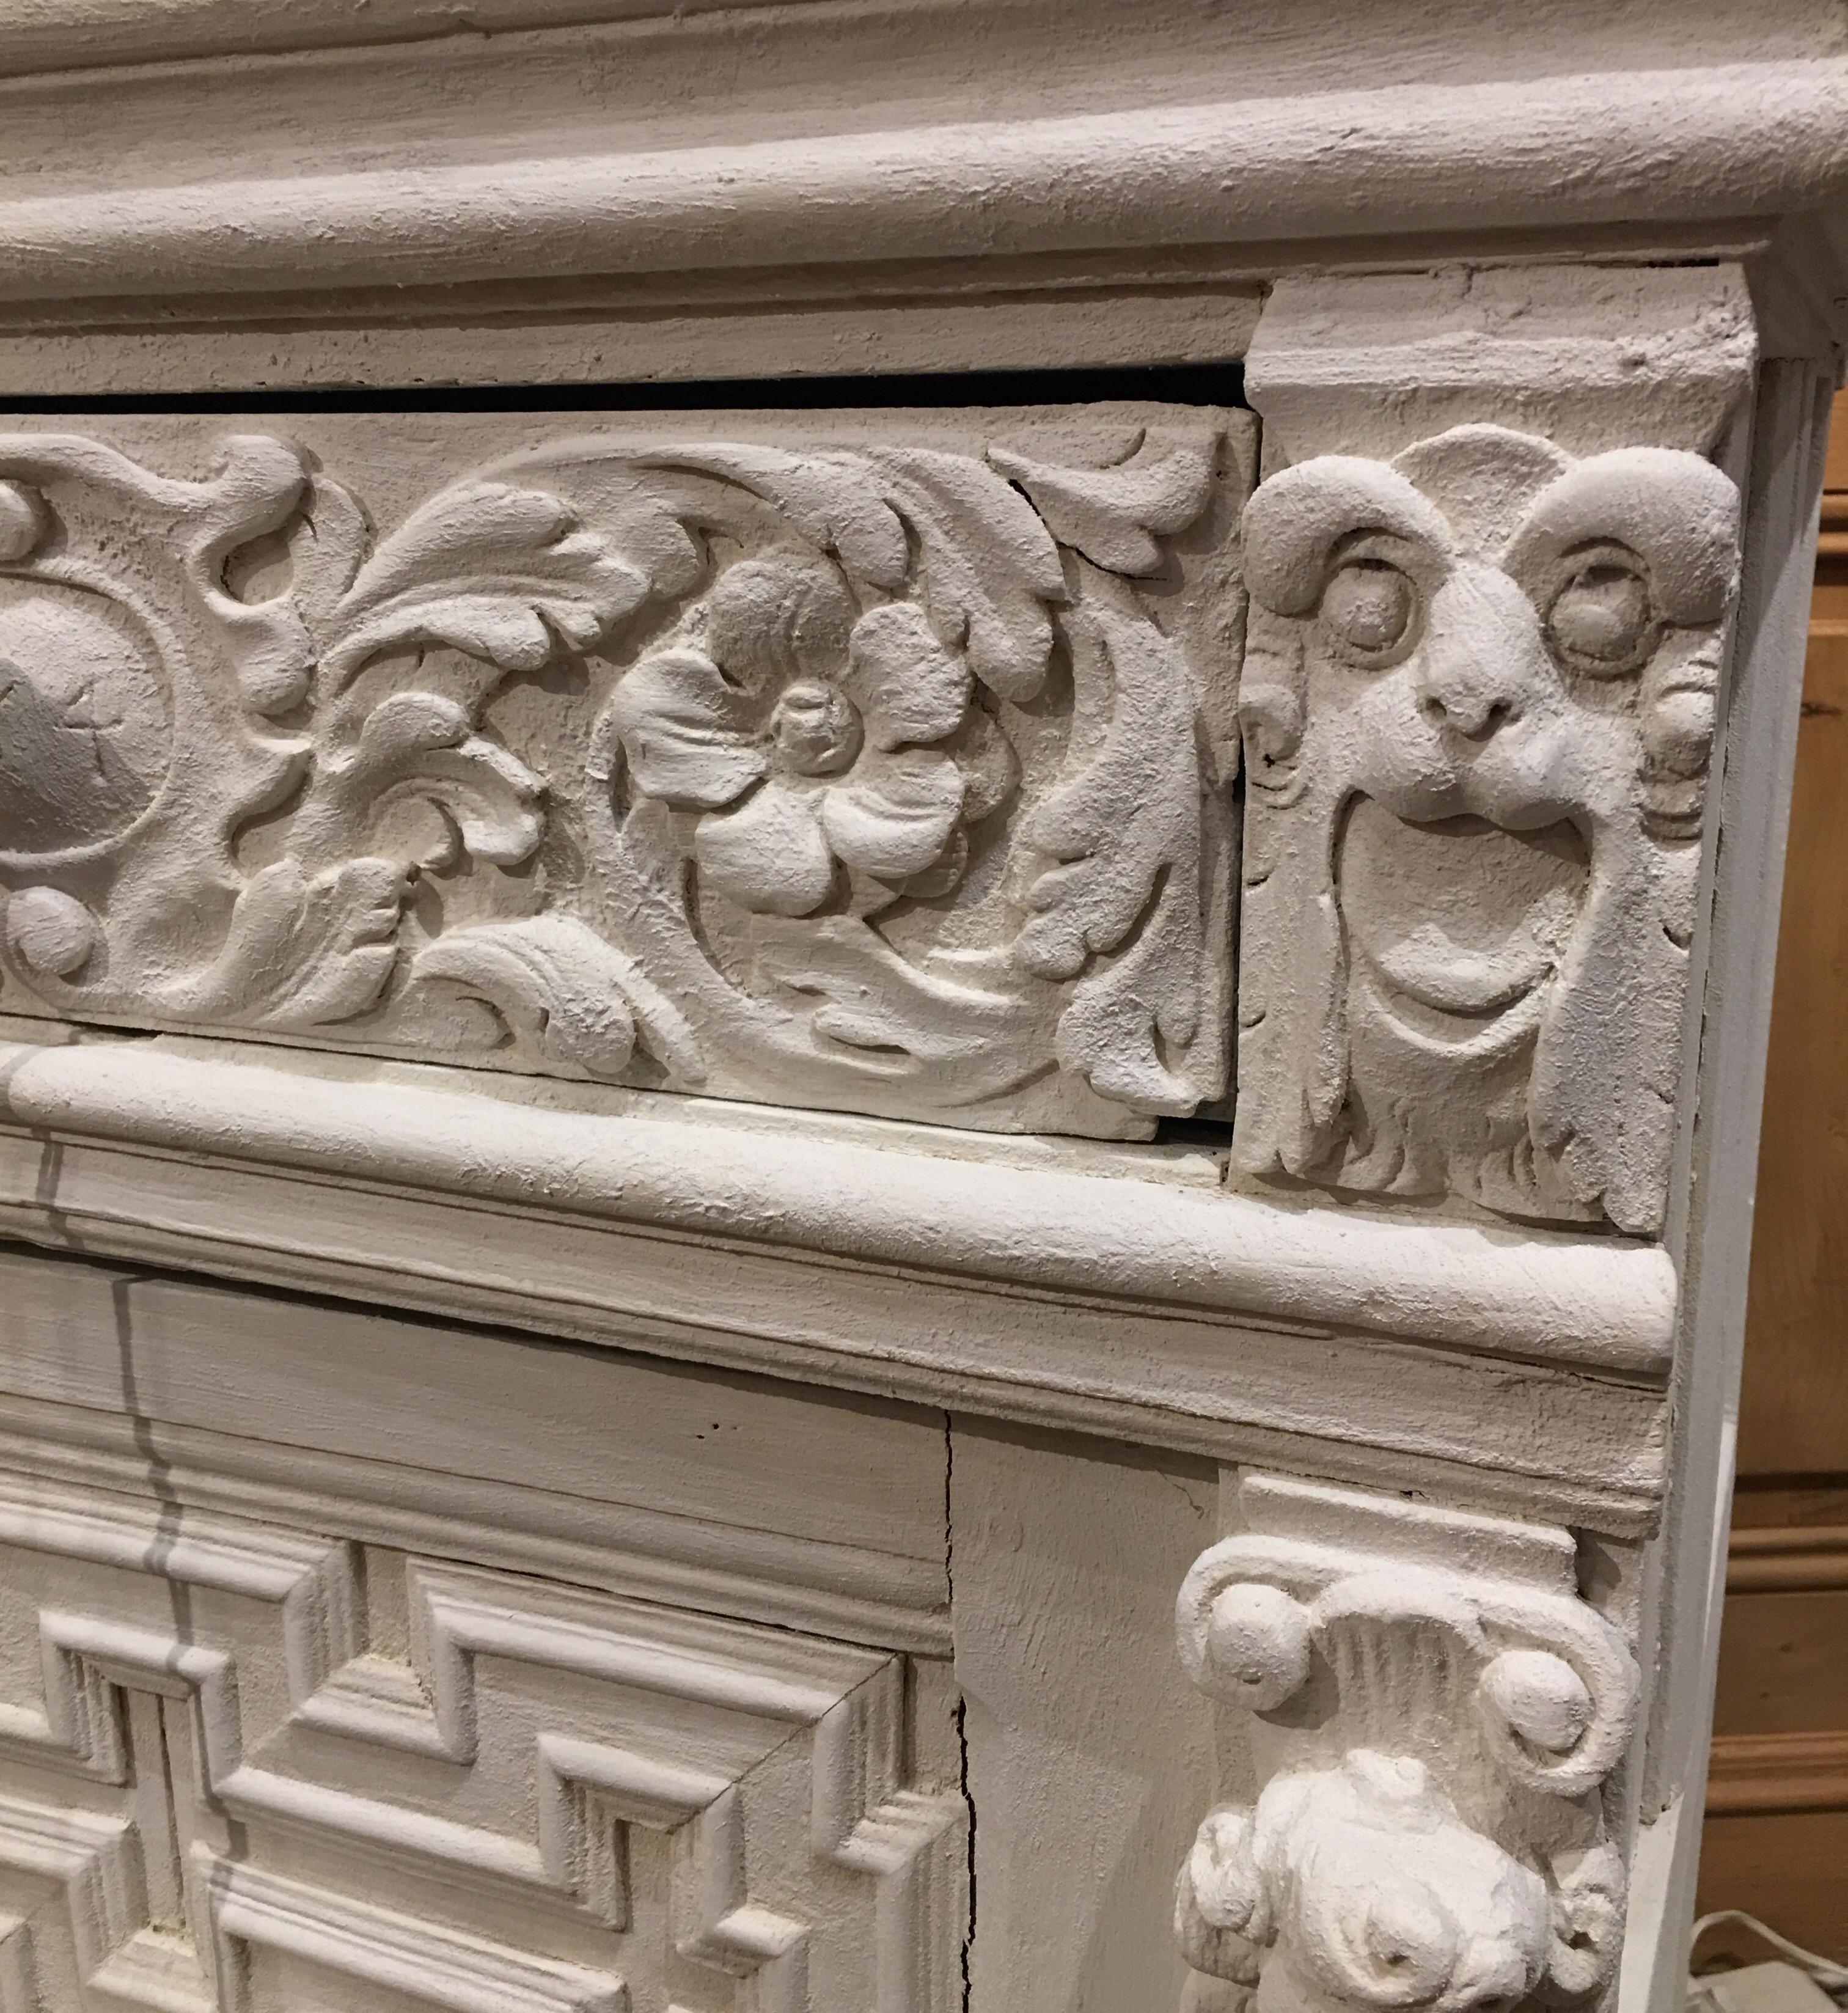 This beautifully carved, early 19th Century cabinet has lovely carvings and has been recently refinished with Joan Westwater's Cement Finish. The stiles and door are graced with cherubs, acanthus carvings and geometrically patterned mouldings. The